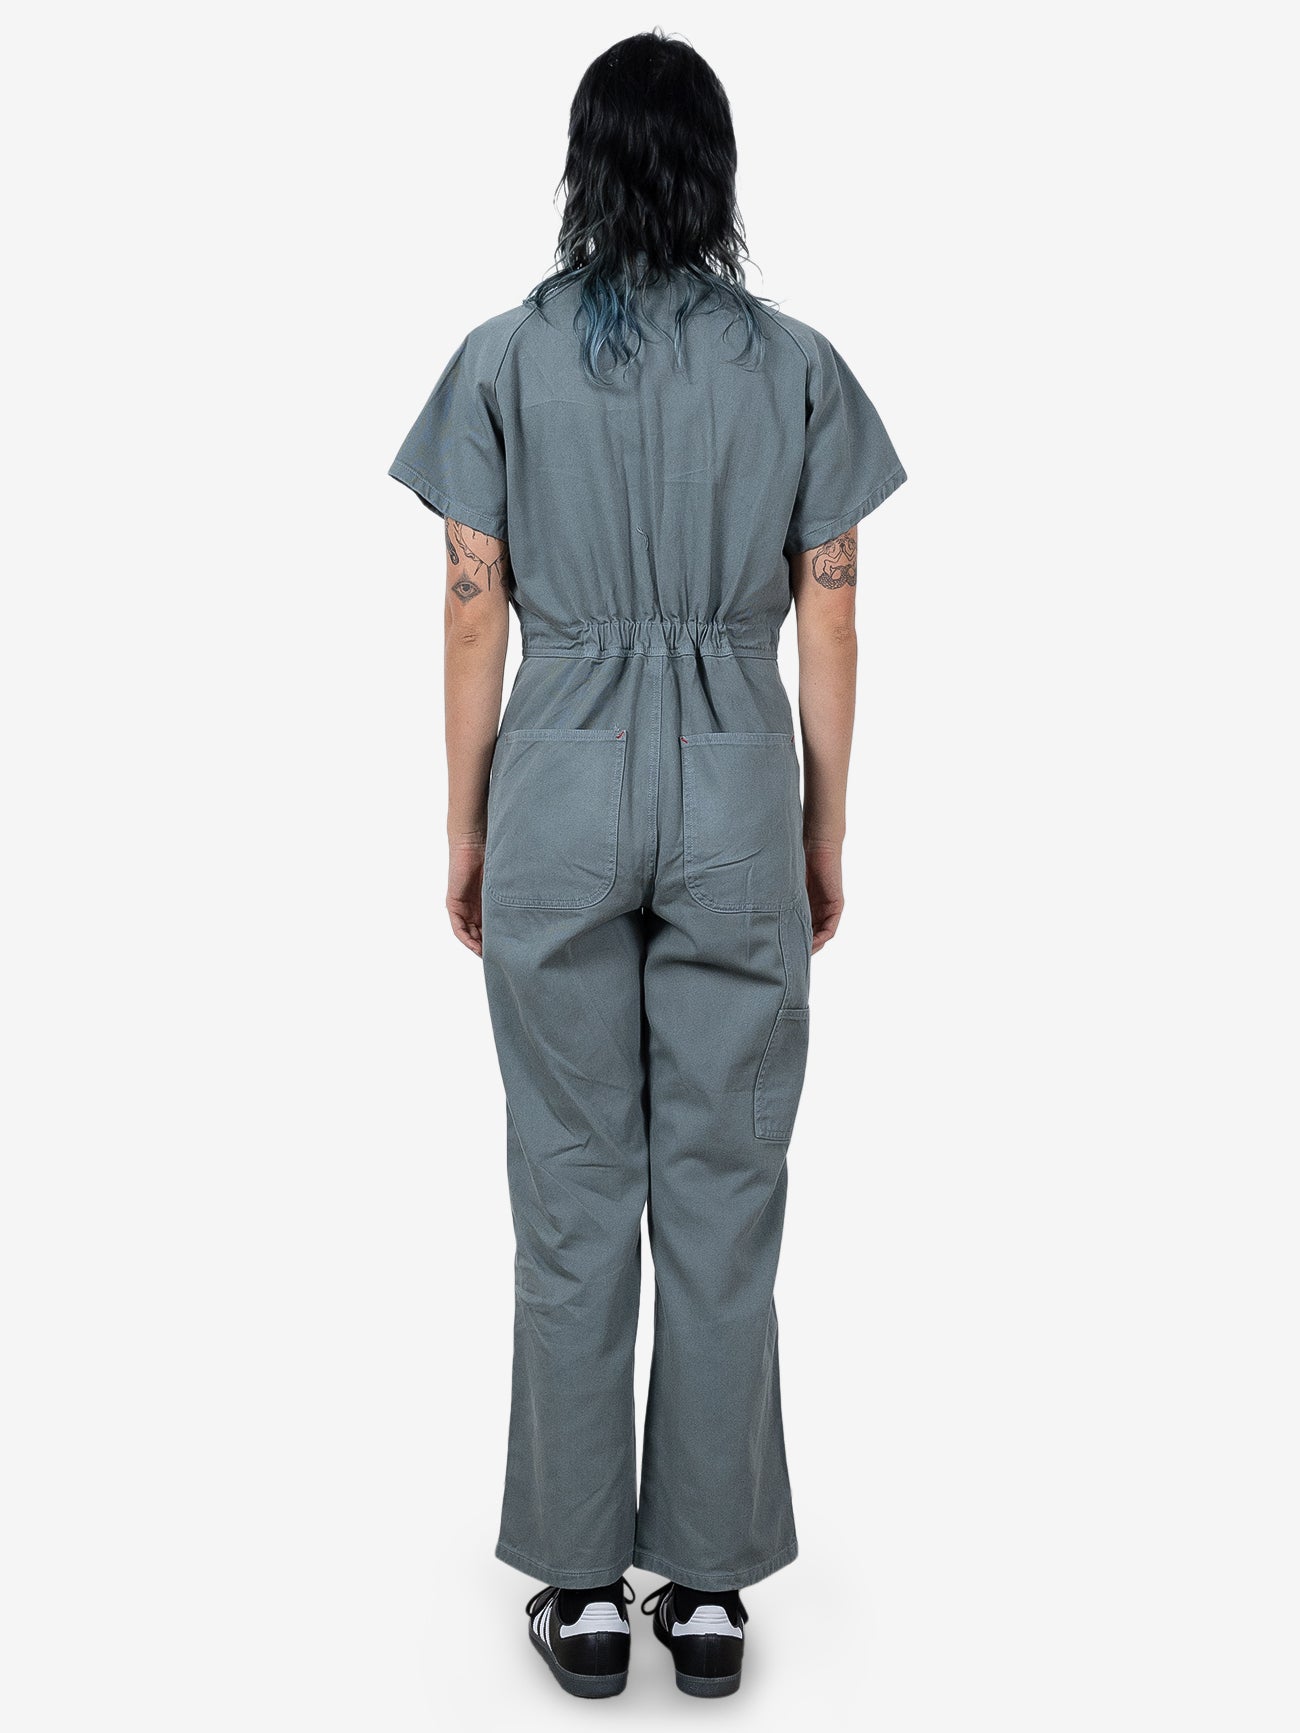 HYC Utility Coverall - Scrubs Green